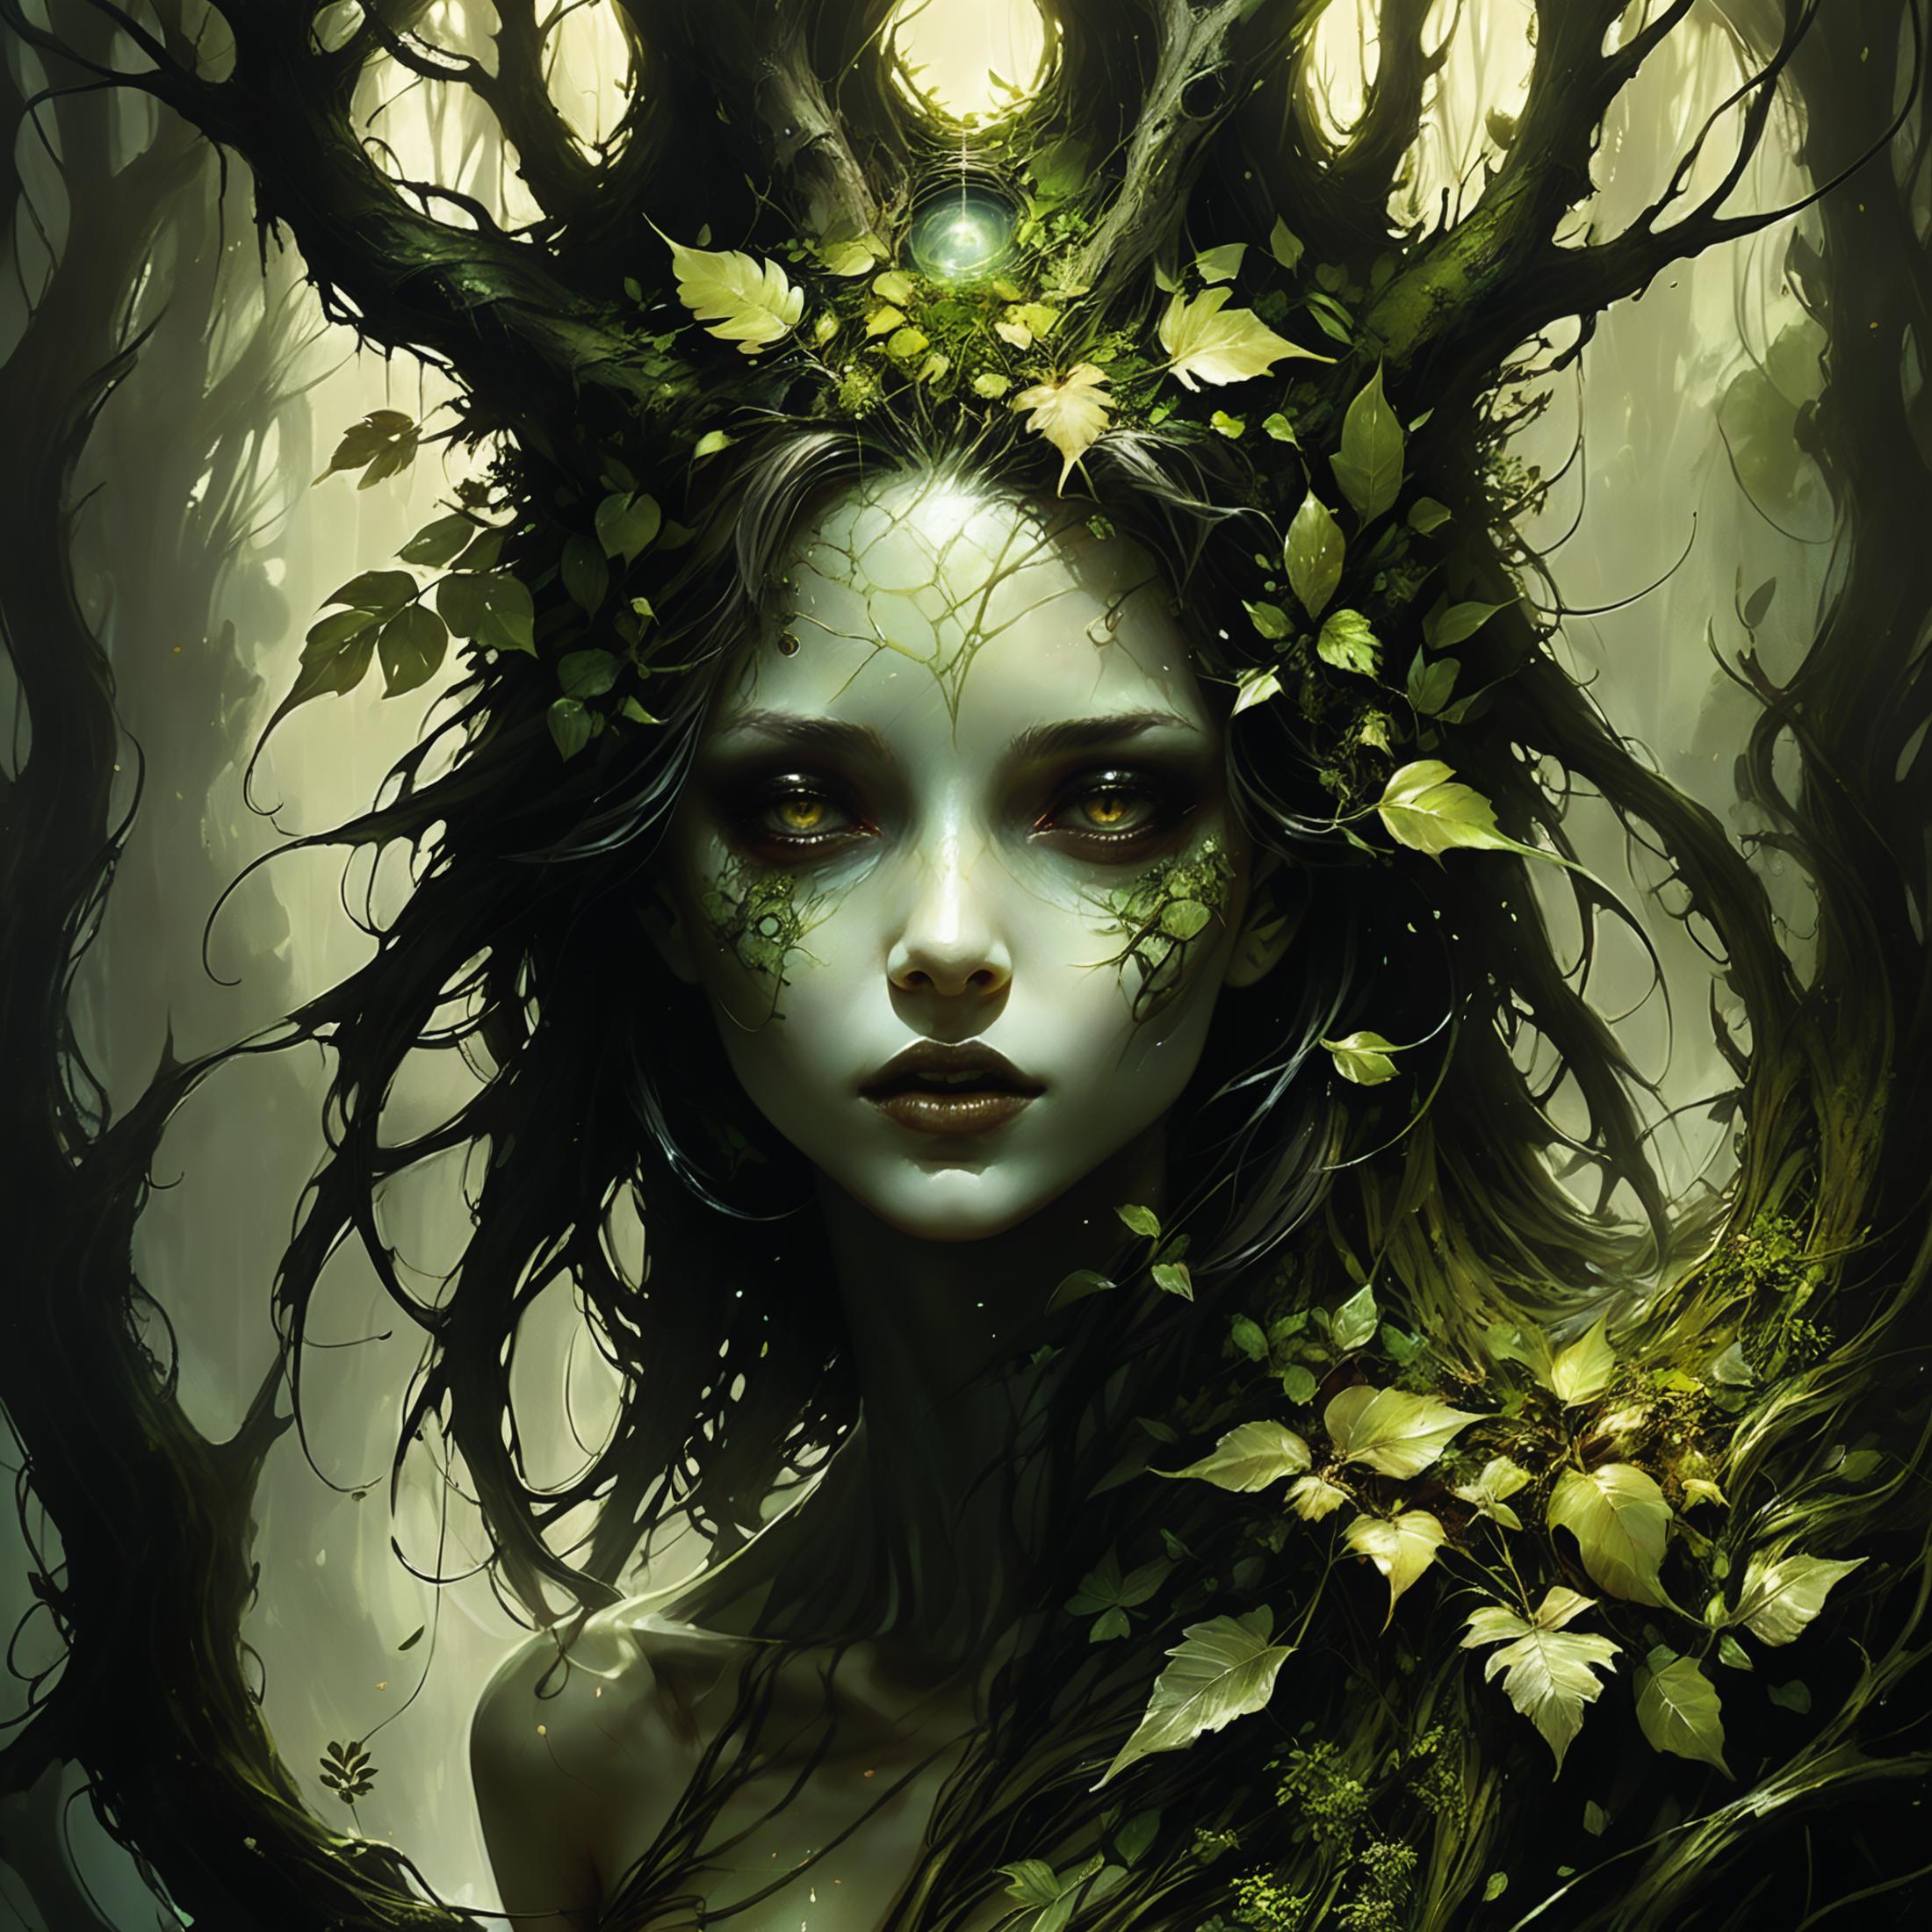 A woman with green makeup and a green tree on her head, surrounded by trees and greenery.